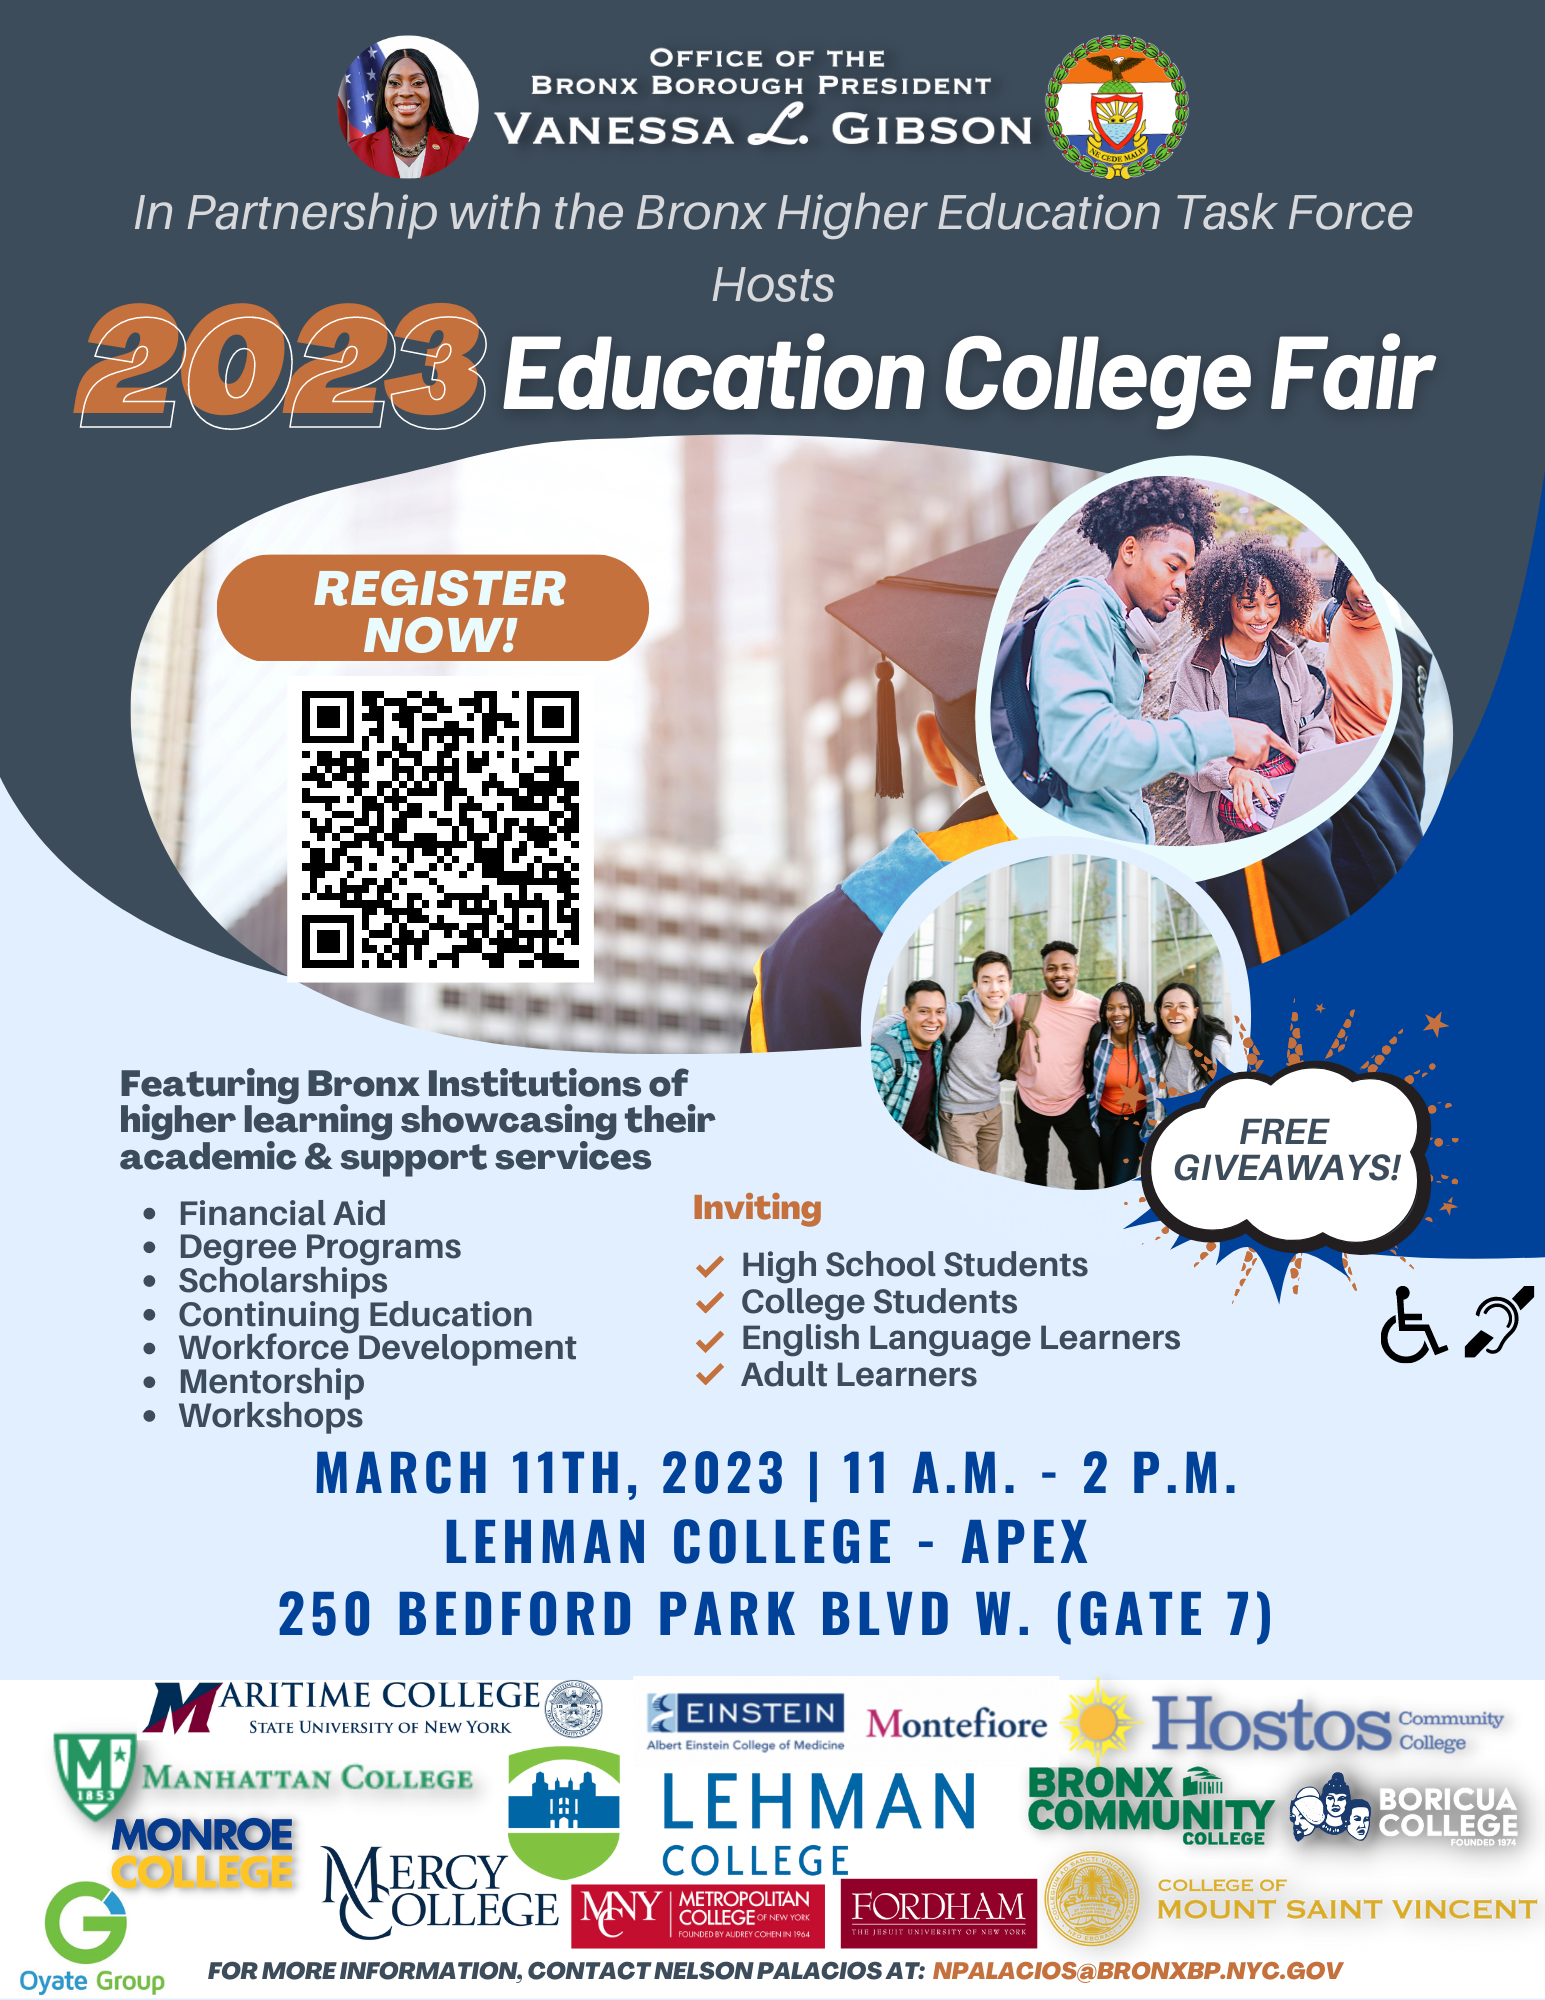 A flyer for a college fair on March 11, 2023 - visit https://www.eventbrite.com/e/2023-education-college-fair-tickets-546100640717 to register.